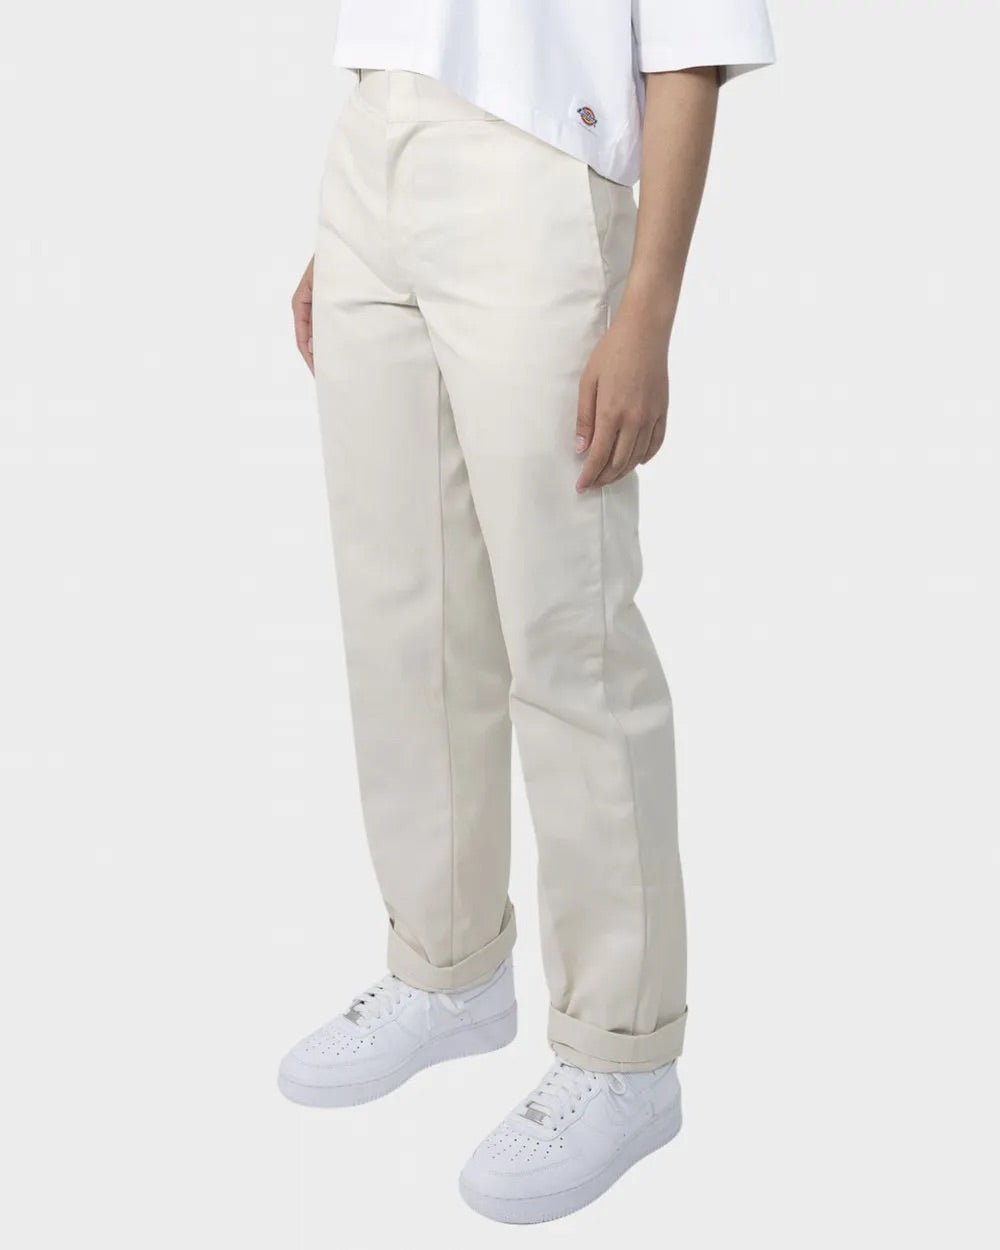 HIGH RISE TAPERED FIT PANT BONE - SUNDAY BEST TRADING CO